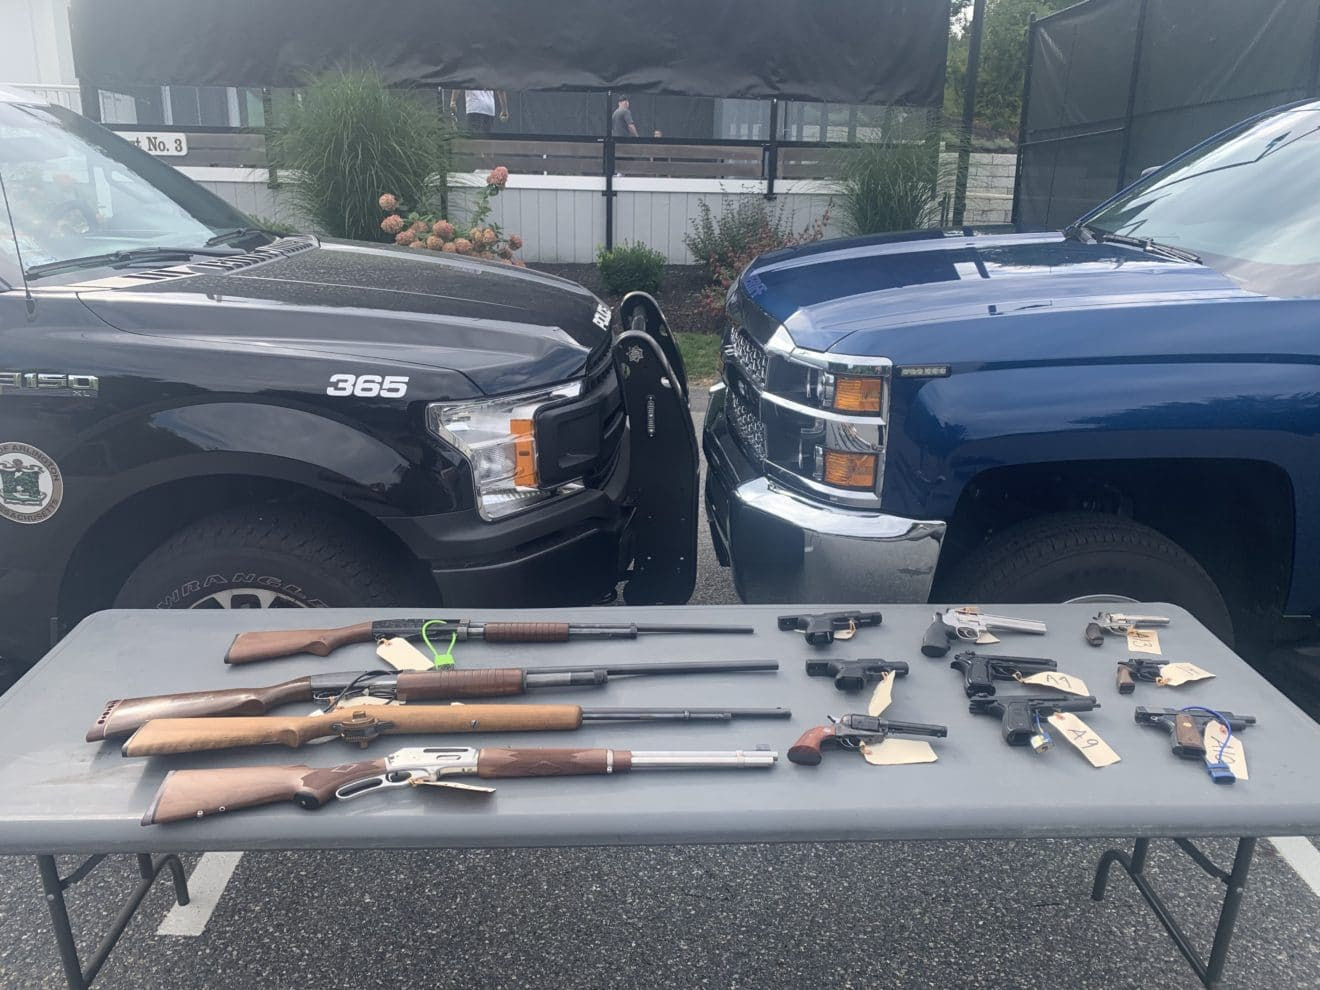 A total of 13 unwanted firearms were taken in by the Arlington Police Department during a “Safer Homes, Safer Community” gun buyback event on Saturday, Oct. 2 at the Winchester Country Club. (Photo courtesy Arlington Police Department)